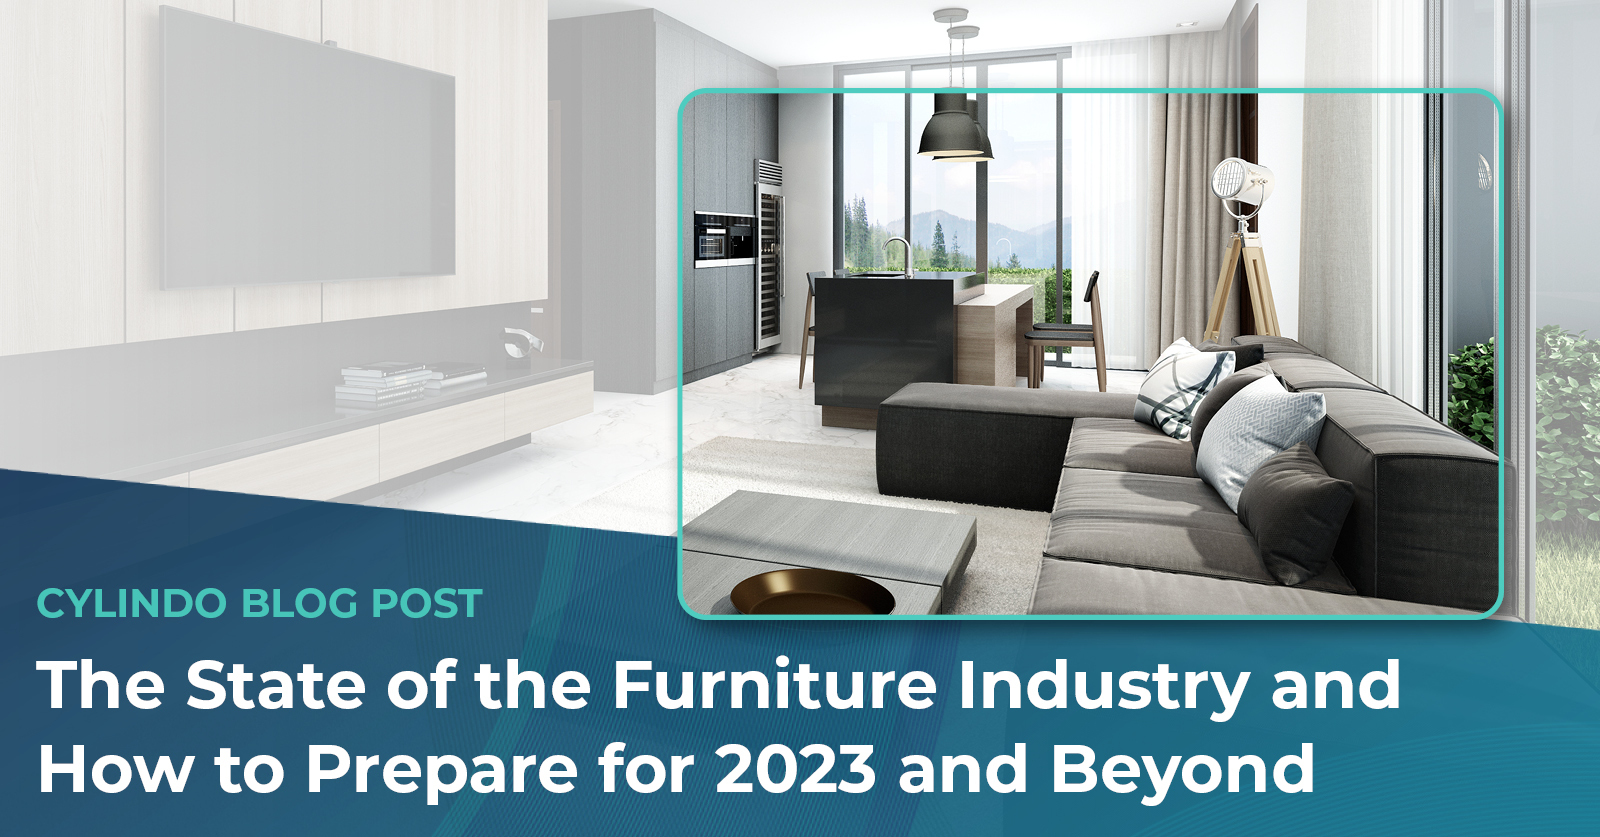 The State of the Furniture Industry and How to Prepare for 2023 and Beyond